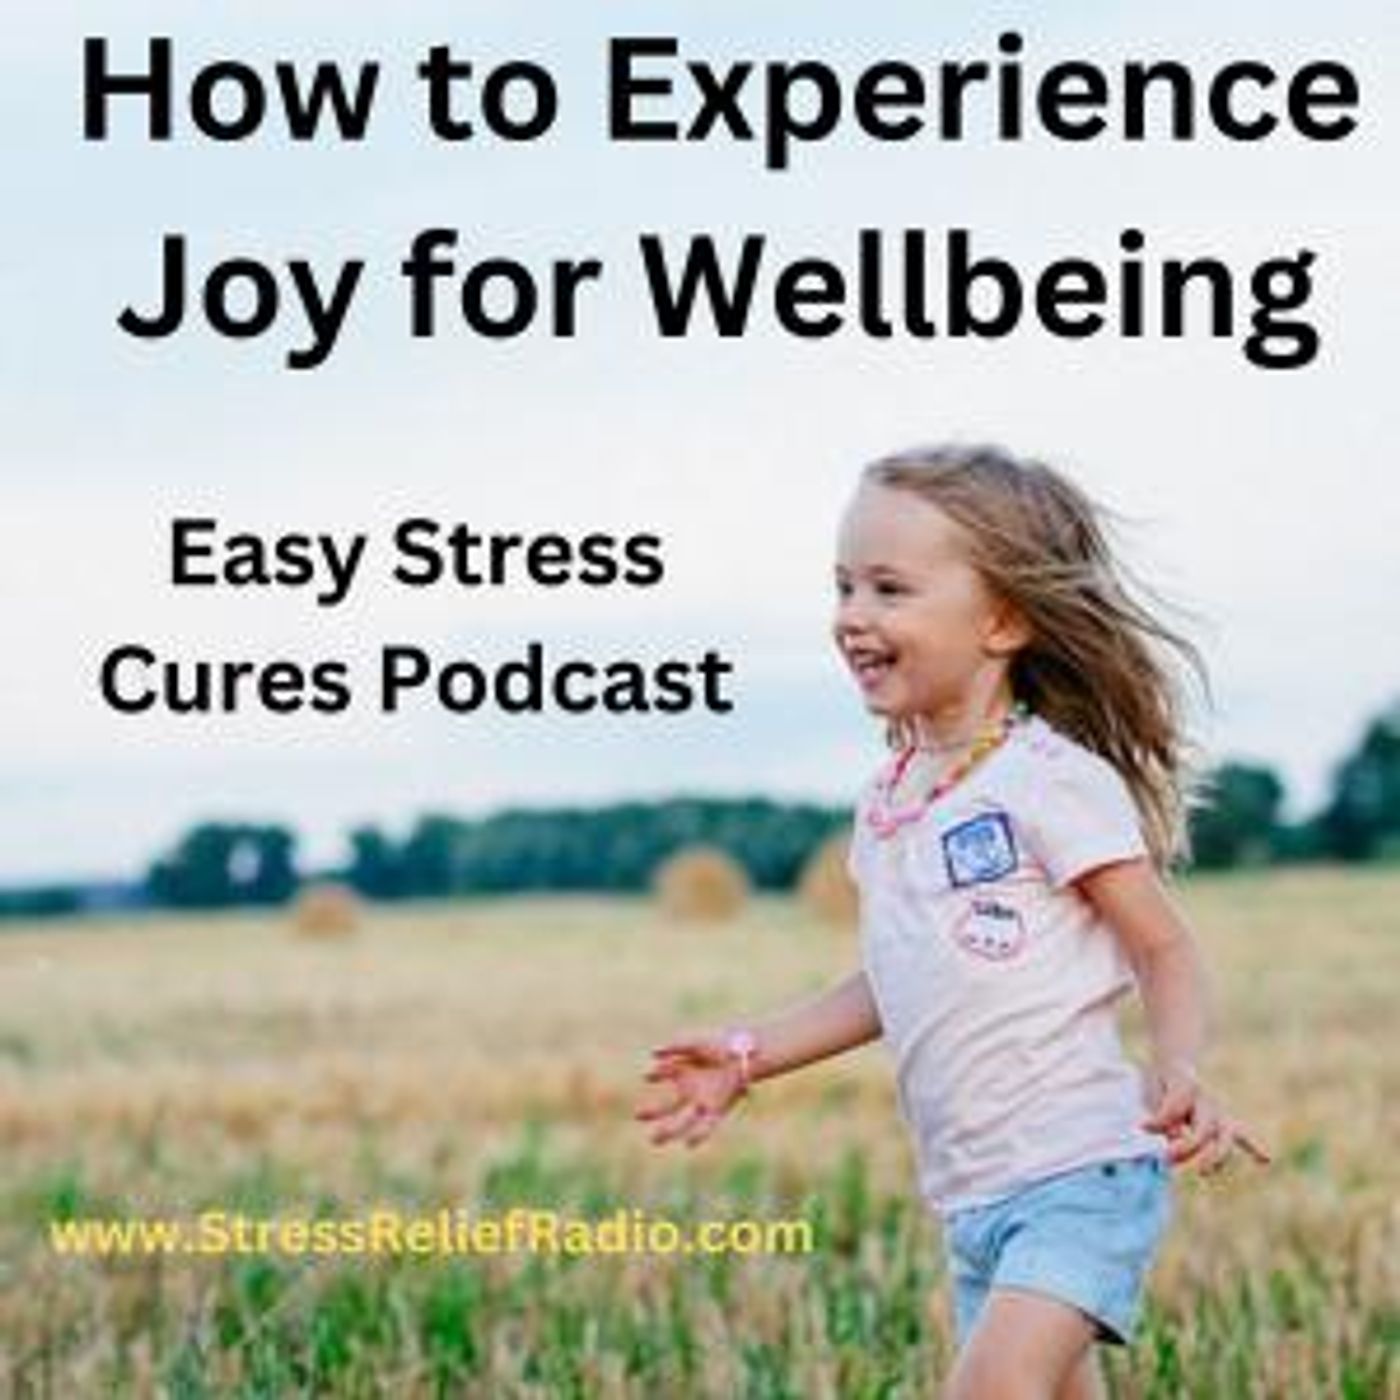 How to Experience Joy for Wellbeing